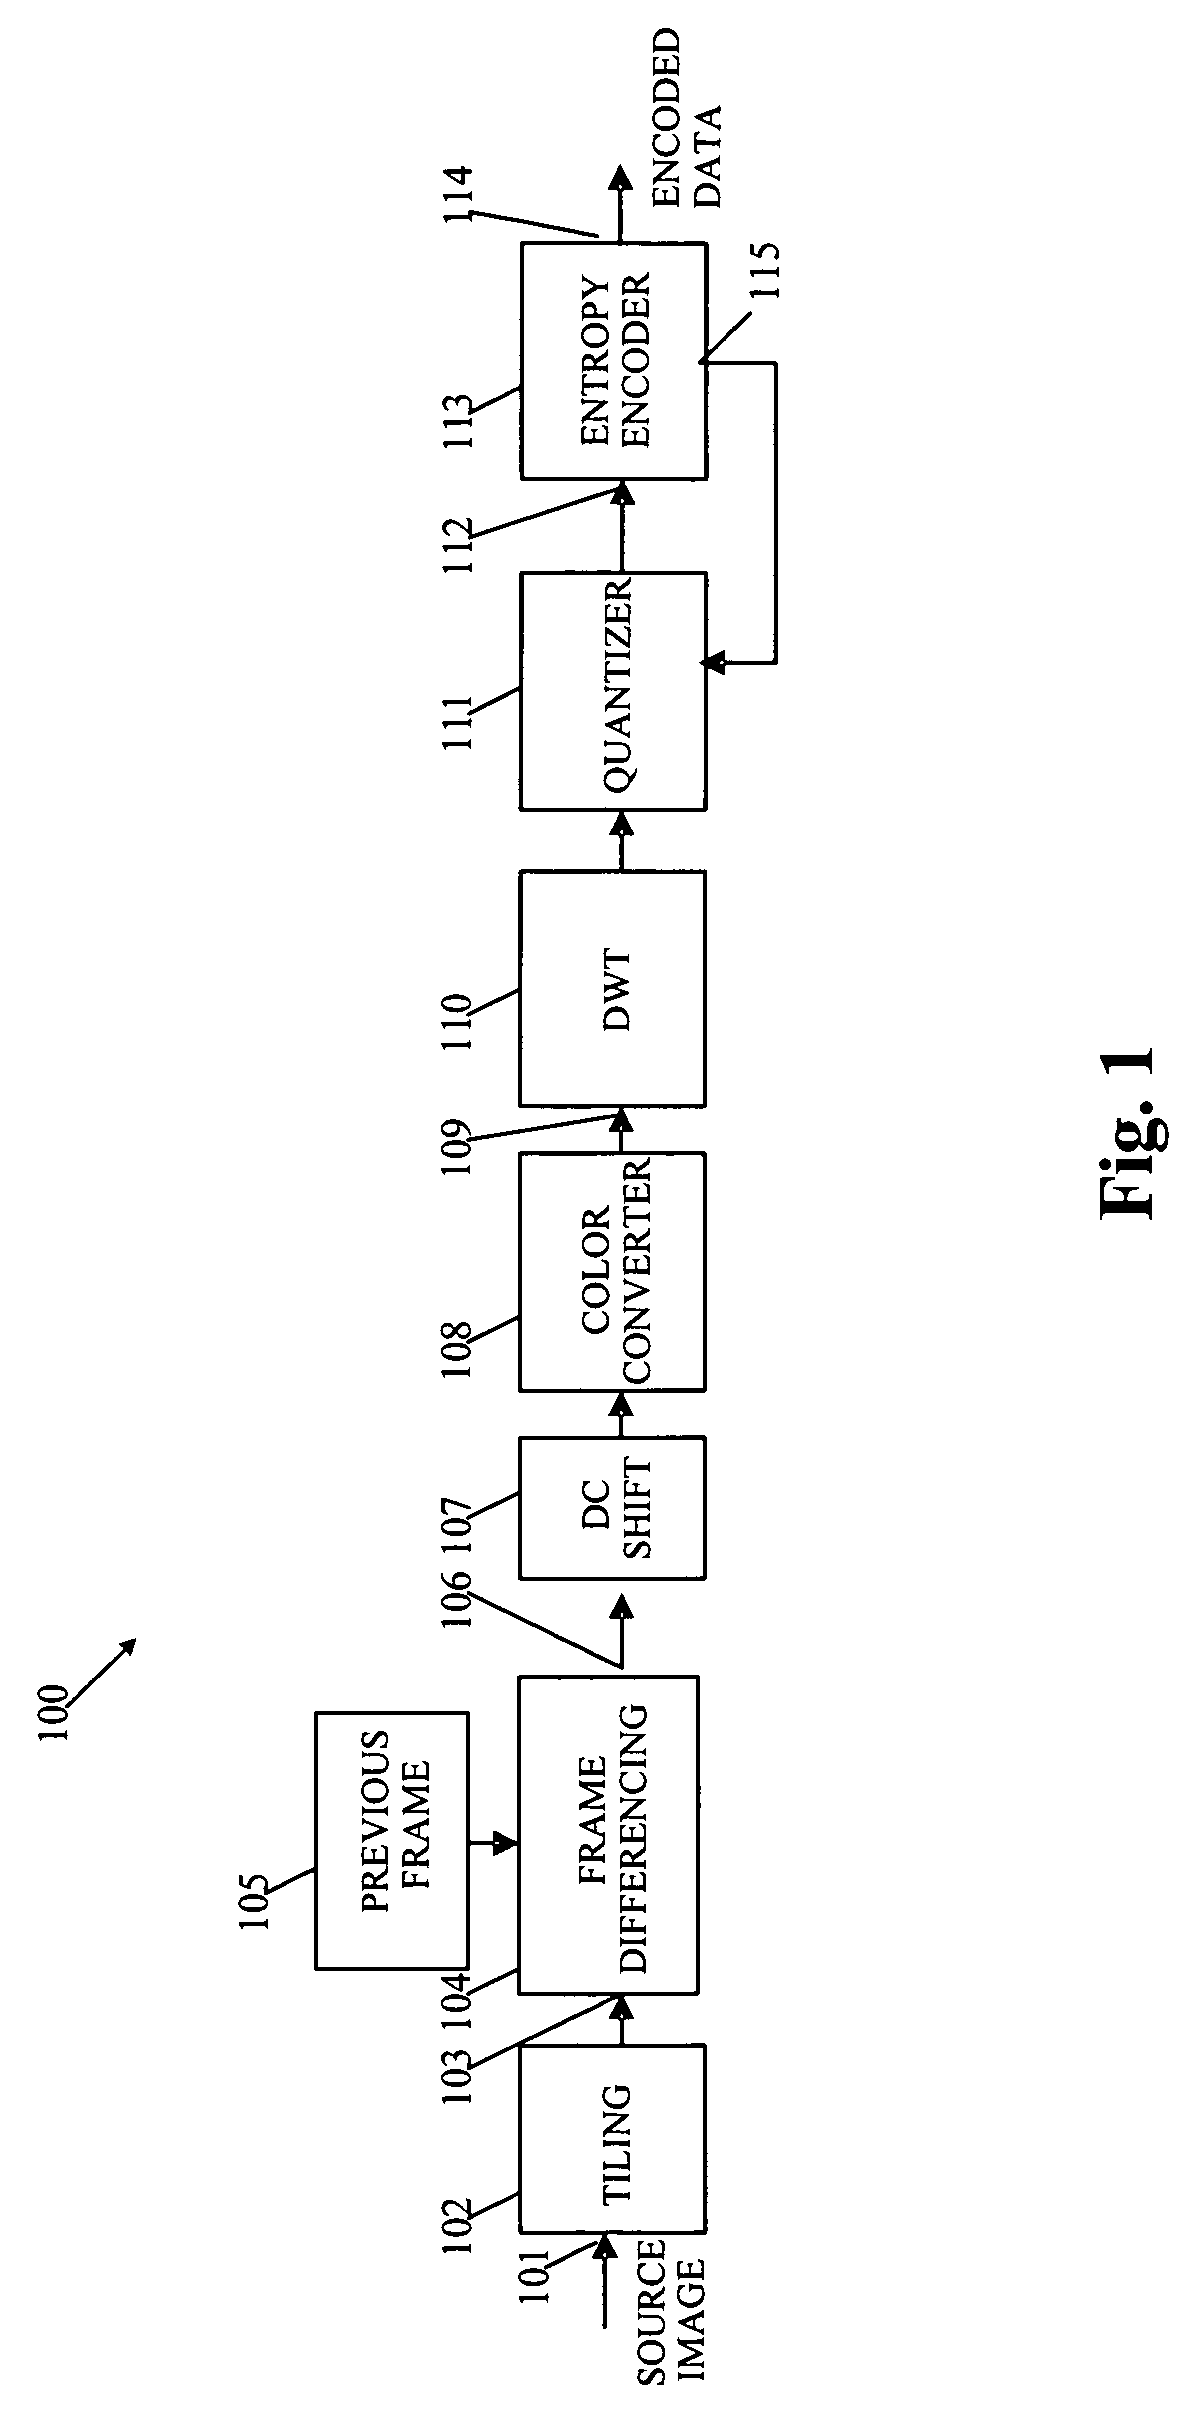 System and method for effectively encoding and decoding electronic information